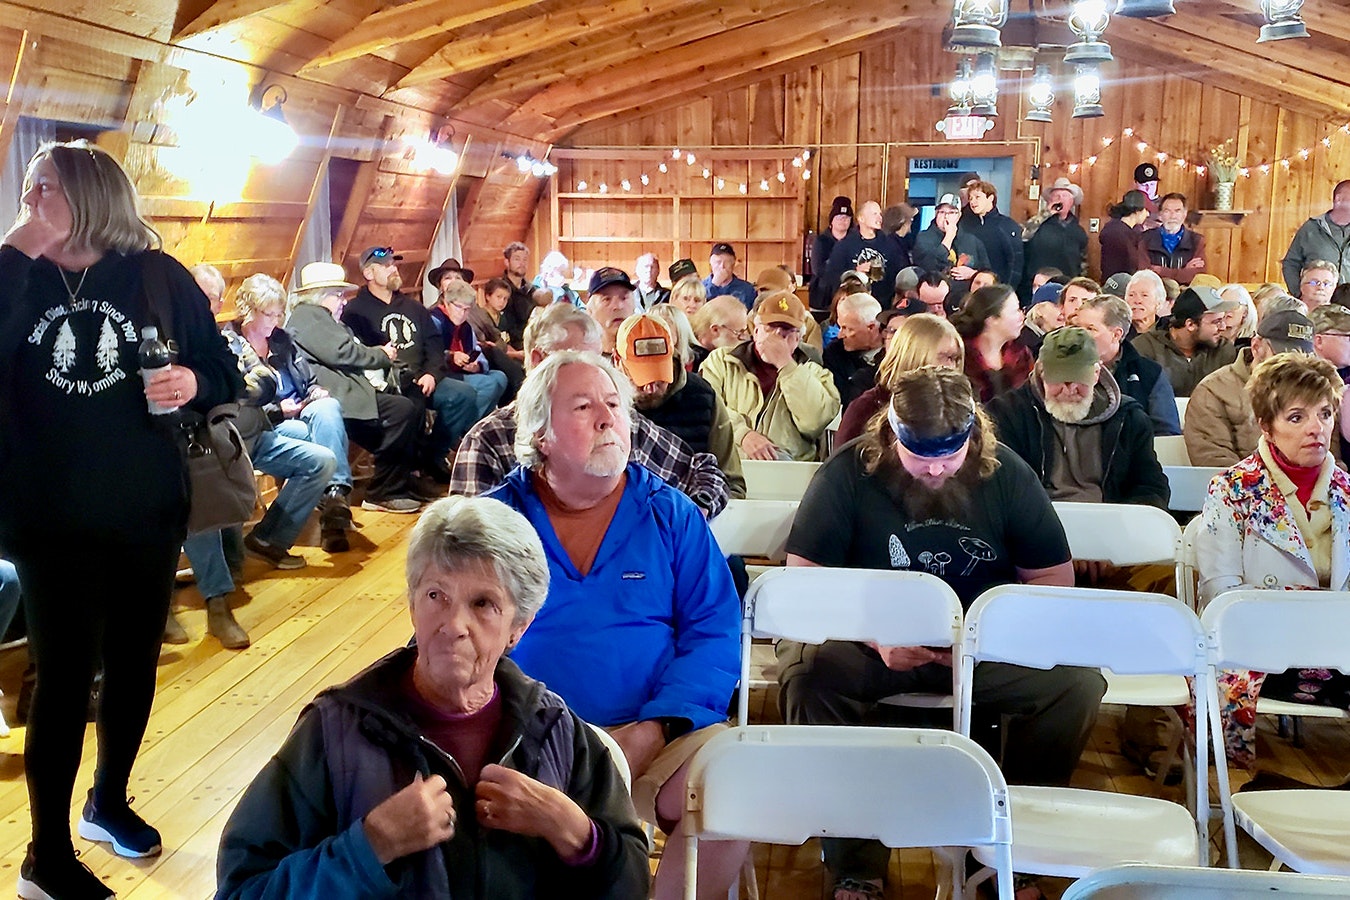 More than 150 people packed into the Wagon Box Inn on Saturday to learn more about the WagonBox DAO, which owns the historic property.